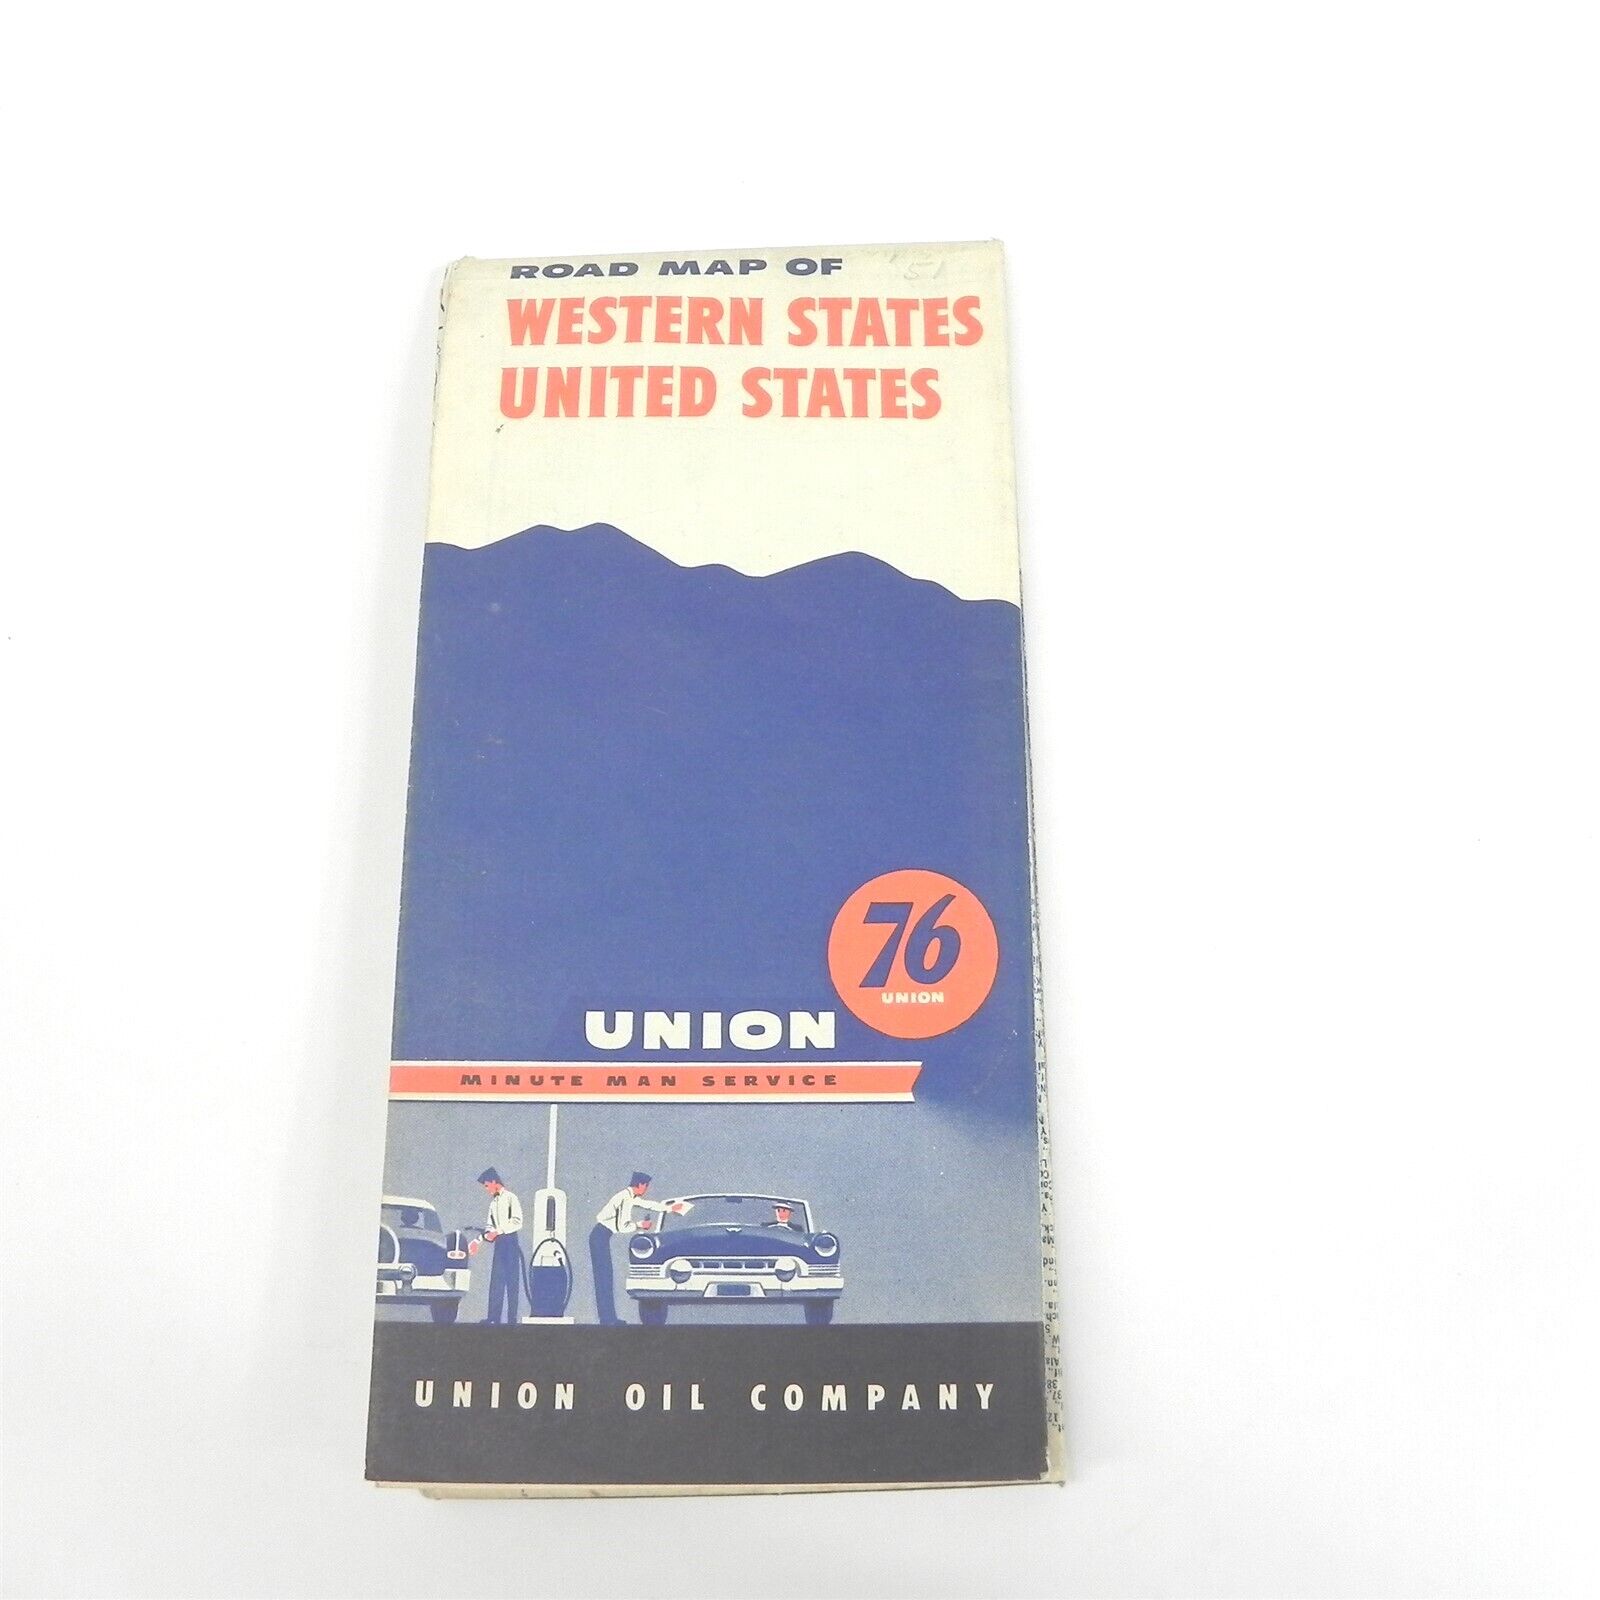 VINTAGE 1951 UNION 76 OIL COMPANY MAP OF THE WESTERN UNITED STATES TOURING GUIDE